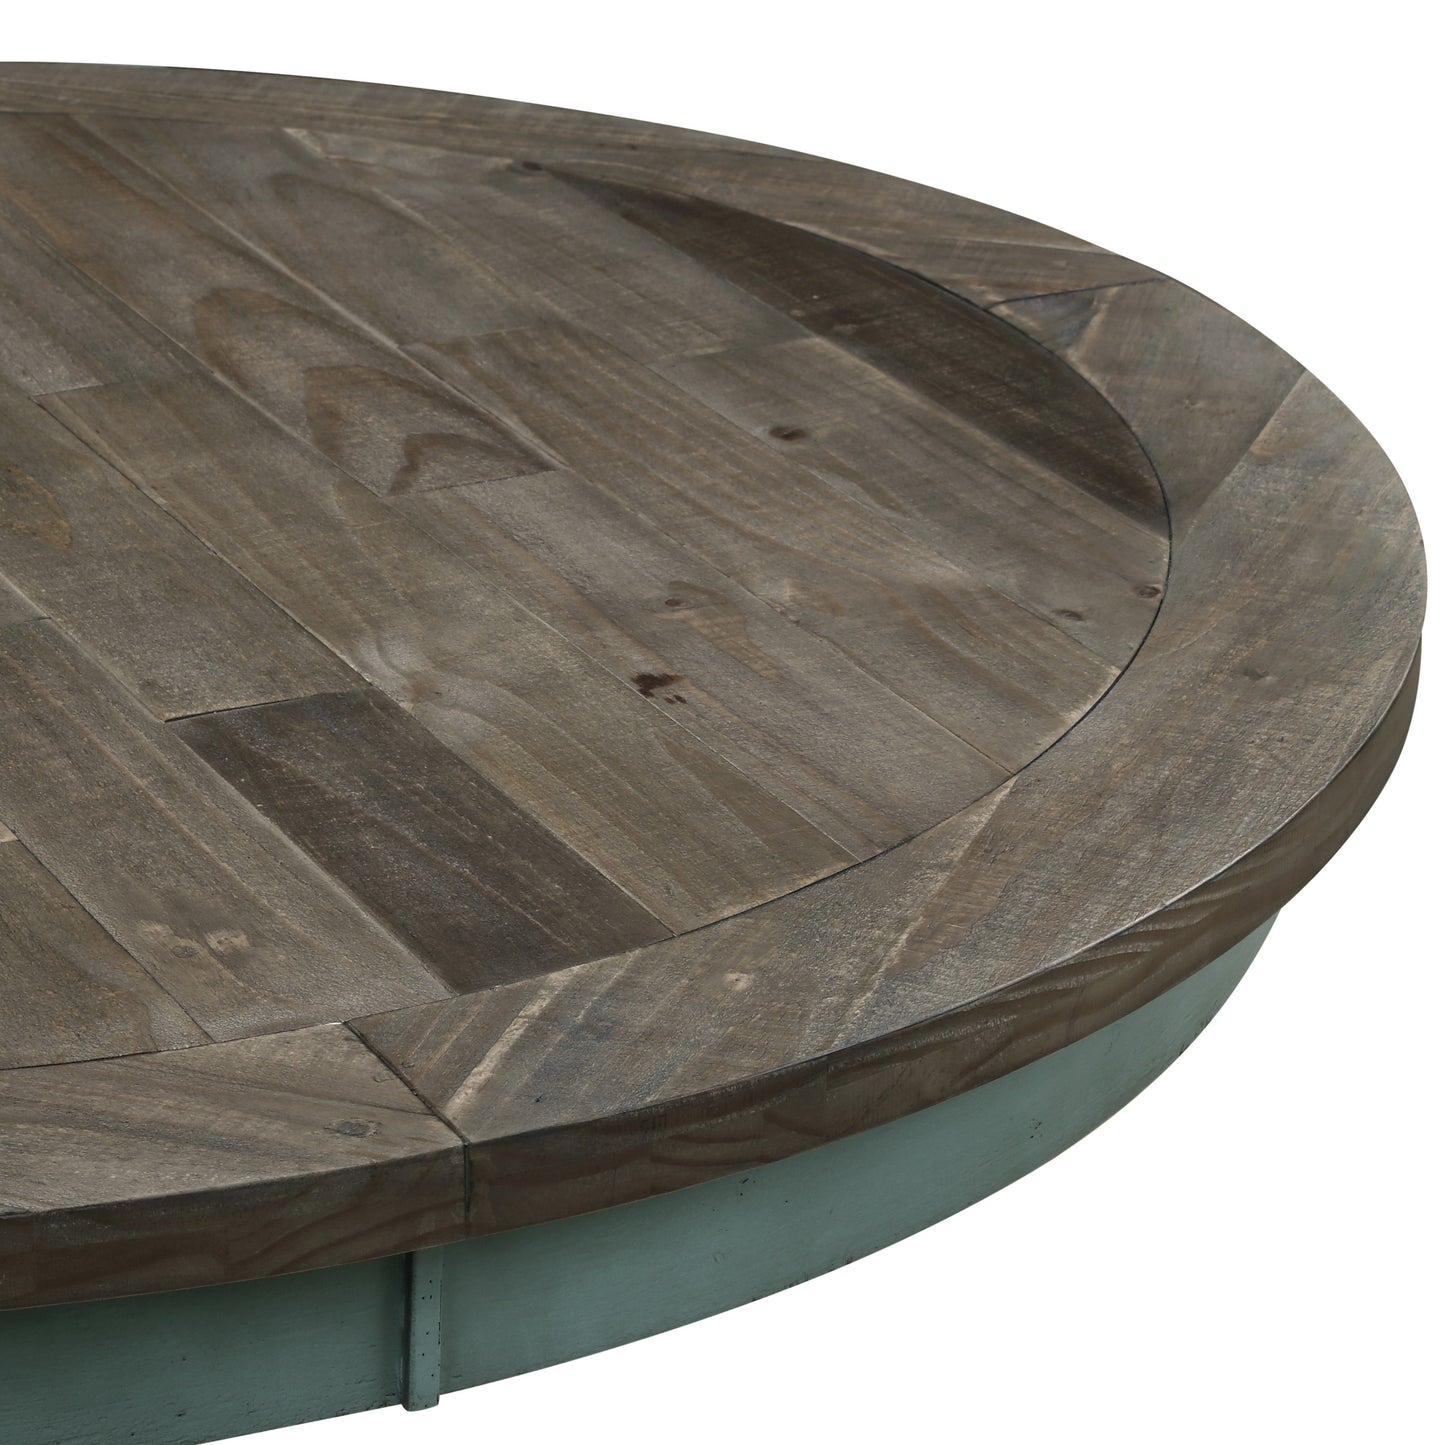 Prato Round Blue and Brown Two-Tone Finish Wood Dining Table